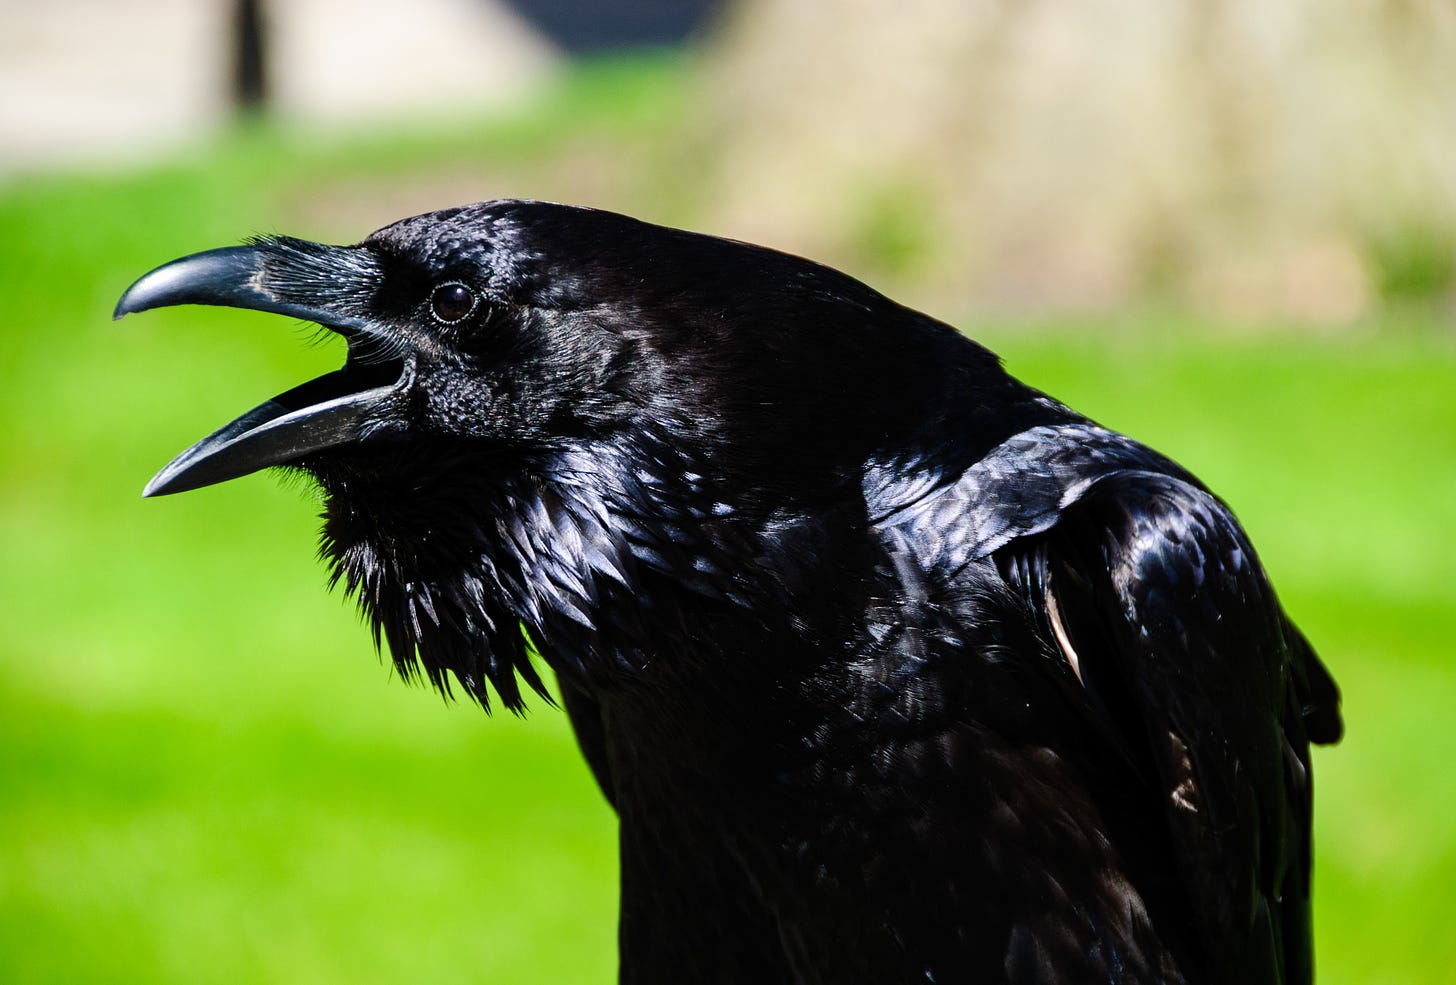 Close up of black crow with beak open wide.